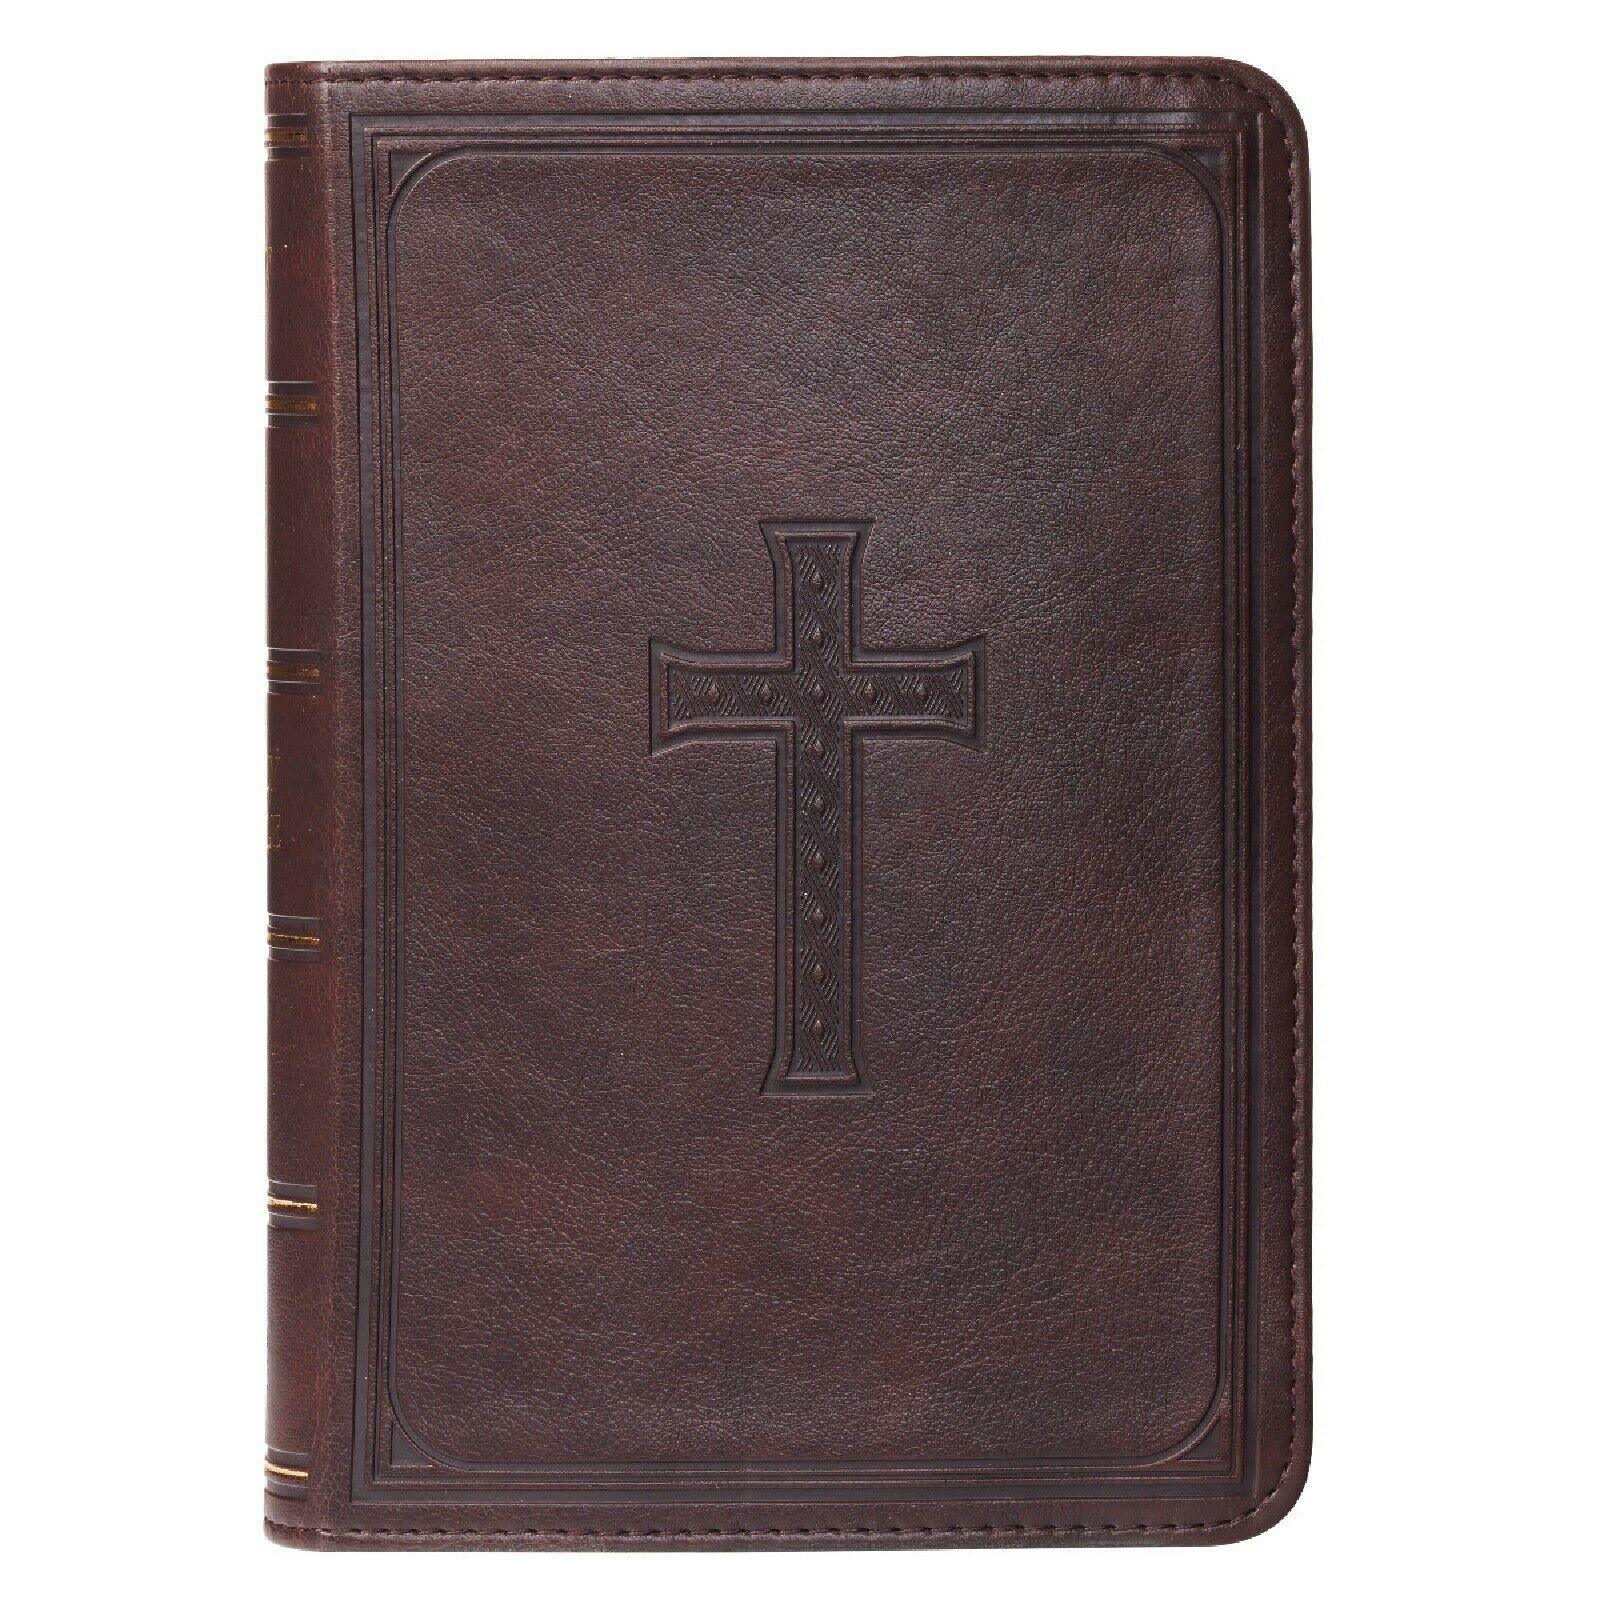 KJV Bible Compact Large Print Brown Lux-Leather Red letter New Shrink Wrapped!! - Etyn Online {{ product_tag }}